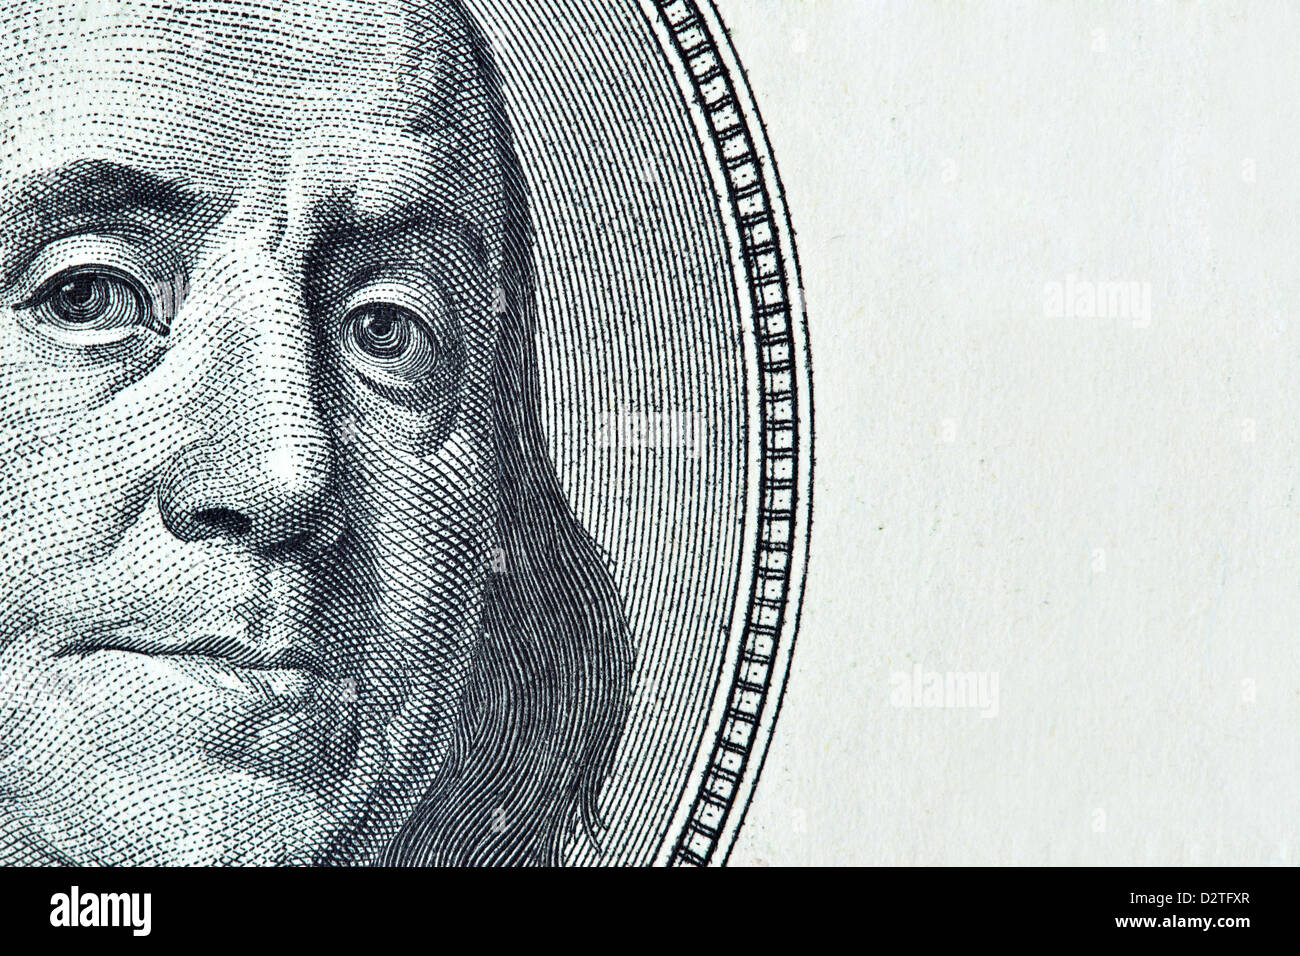 Benjamin Franklin portrait with added space for your own text Stock Photo